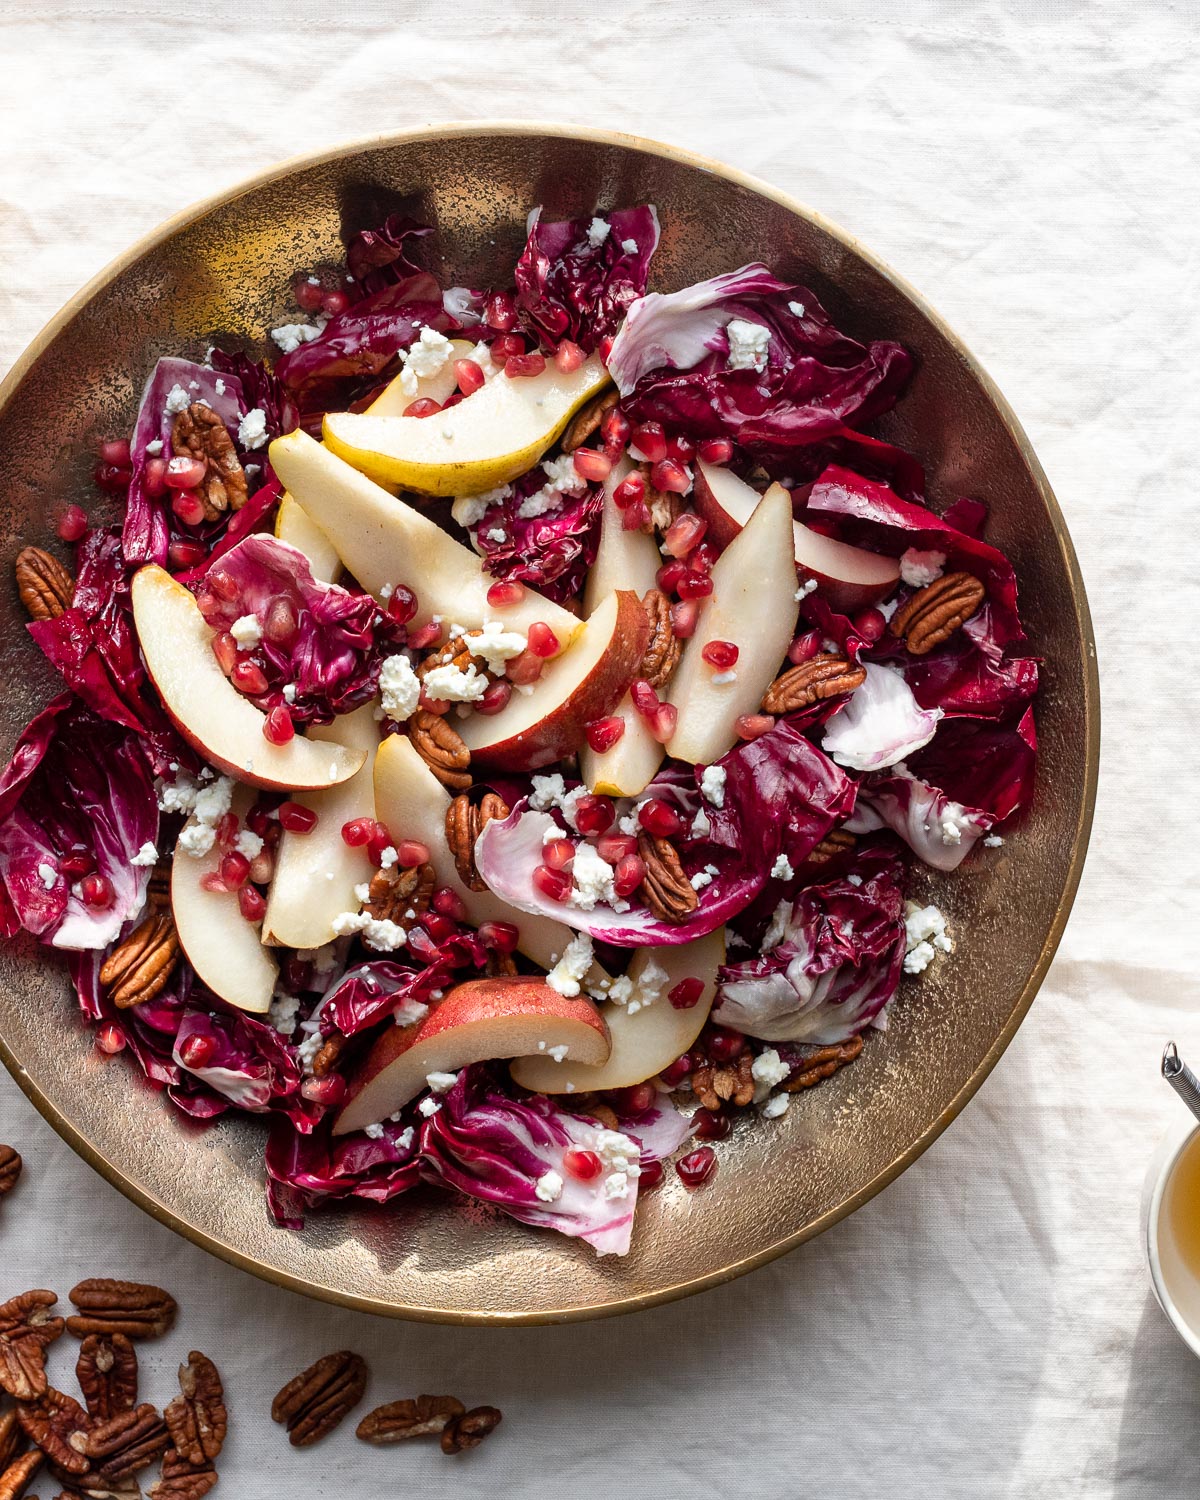 A large salad of radicchio, fresh pears, goat cheese, pecans, and pomegranate in a gold bowl on a linen tablecloth.